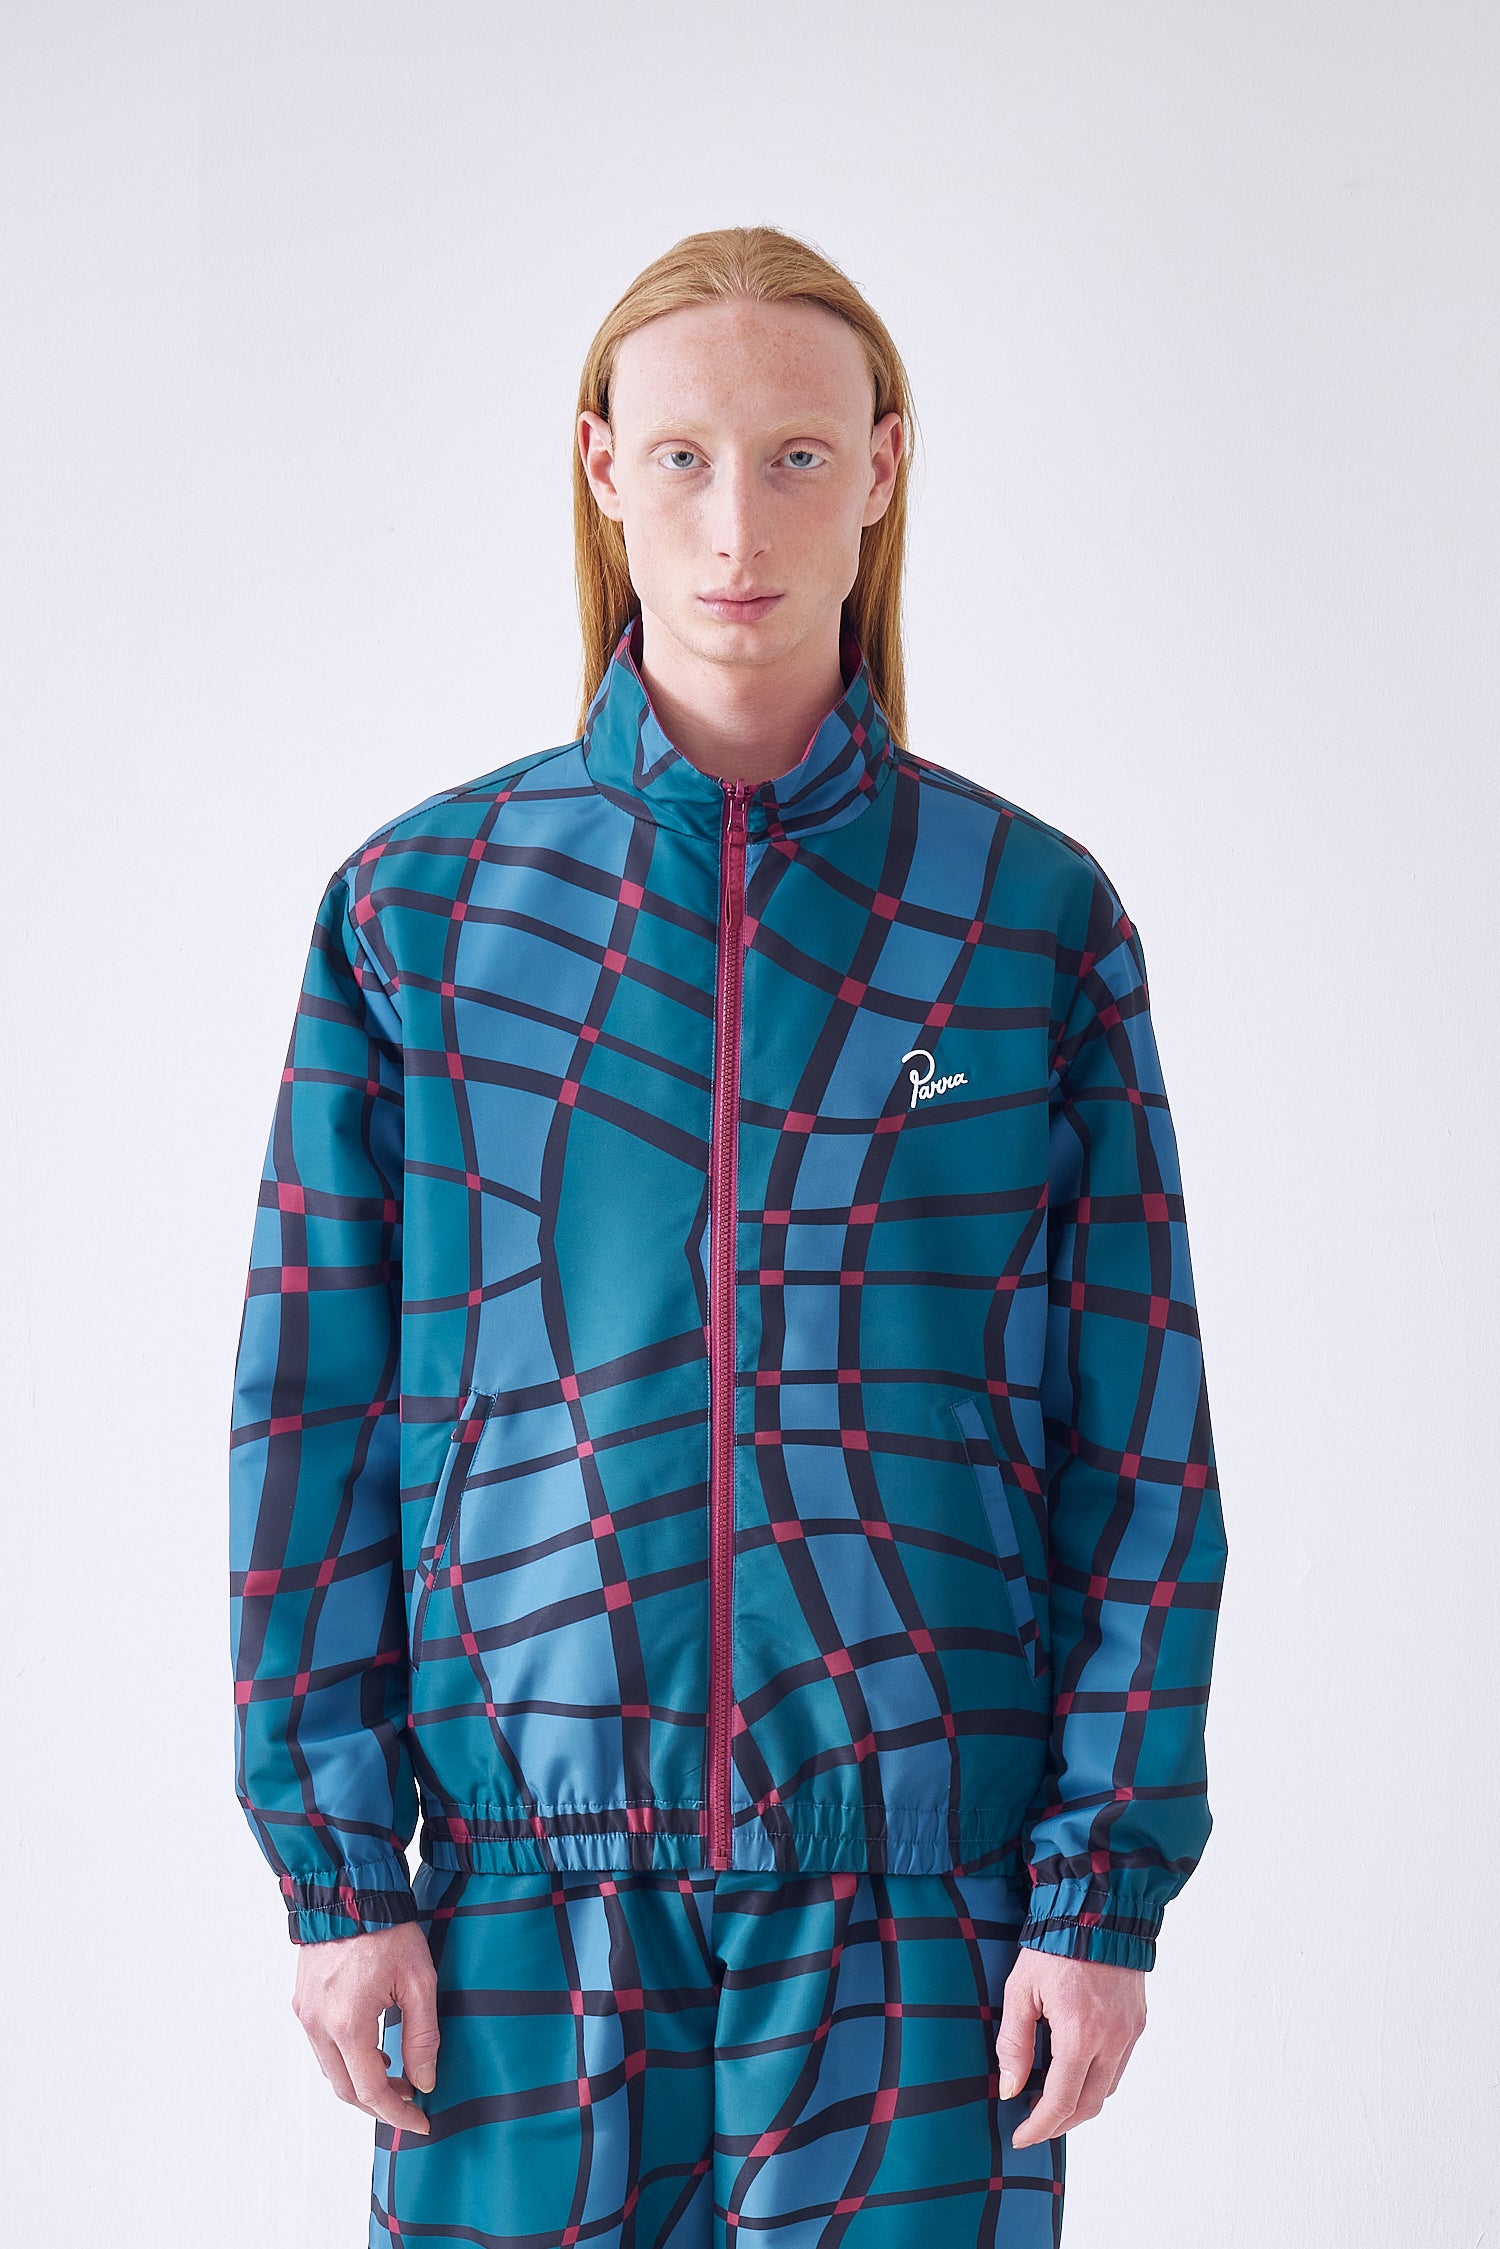 Squared Waves Pattern Track Top